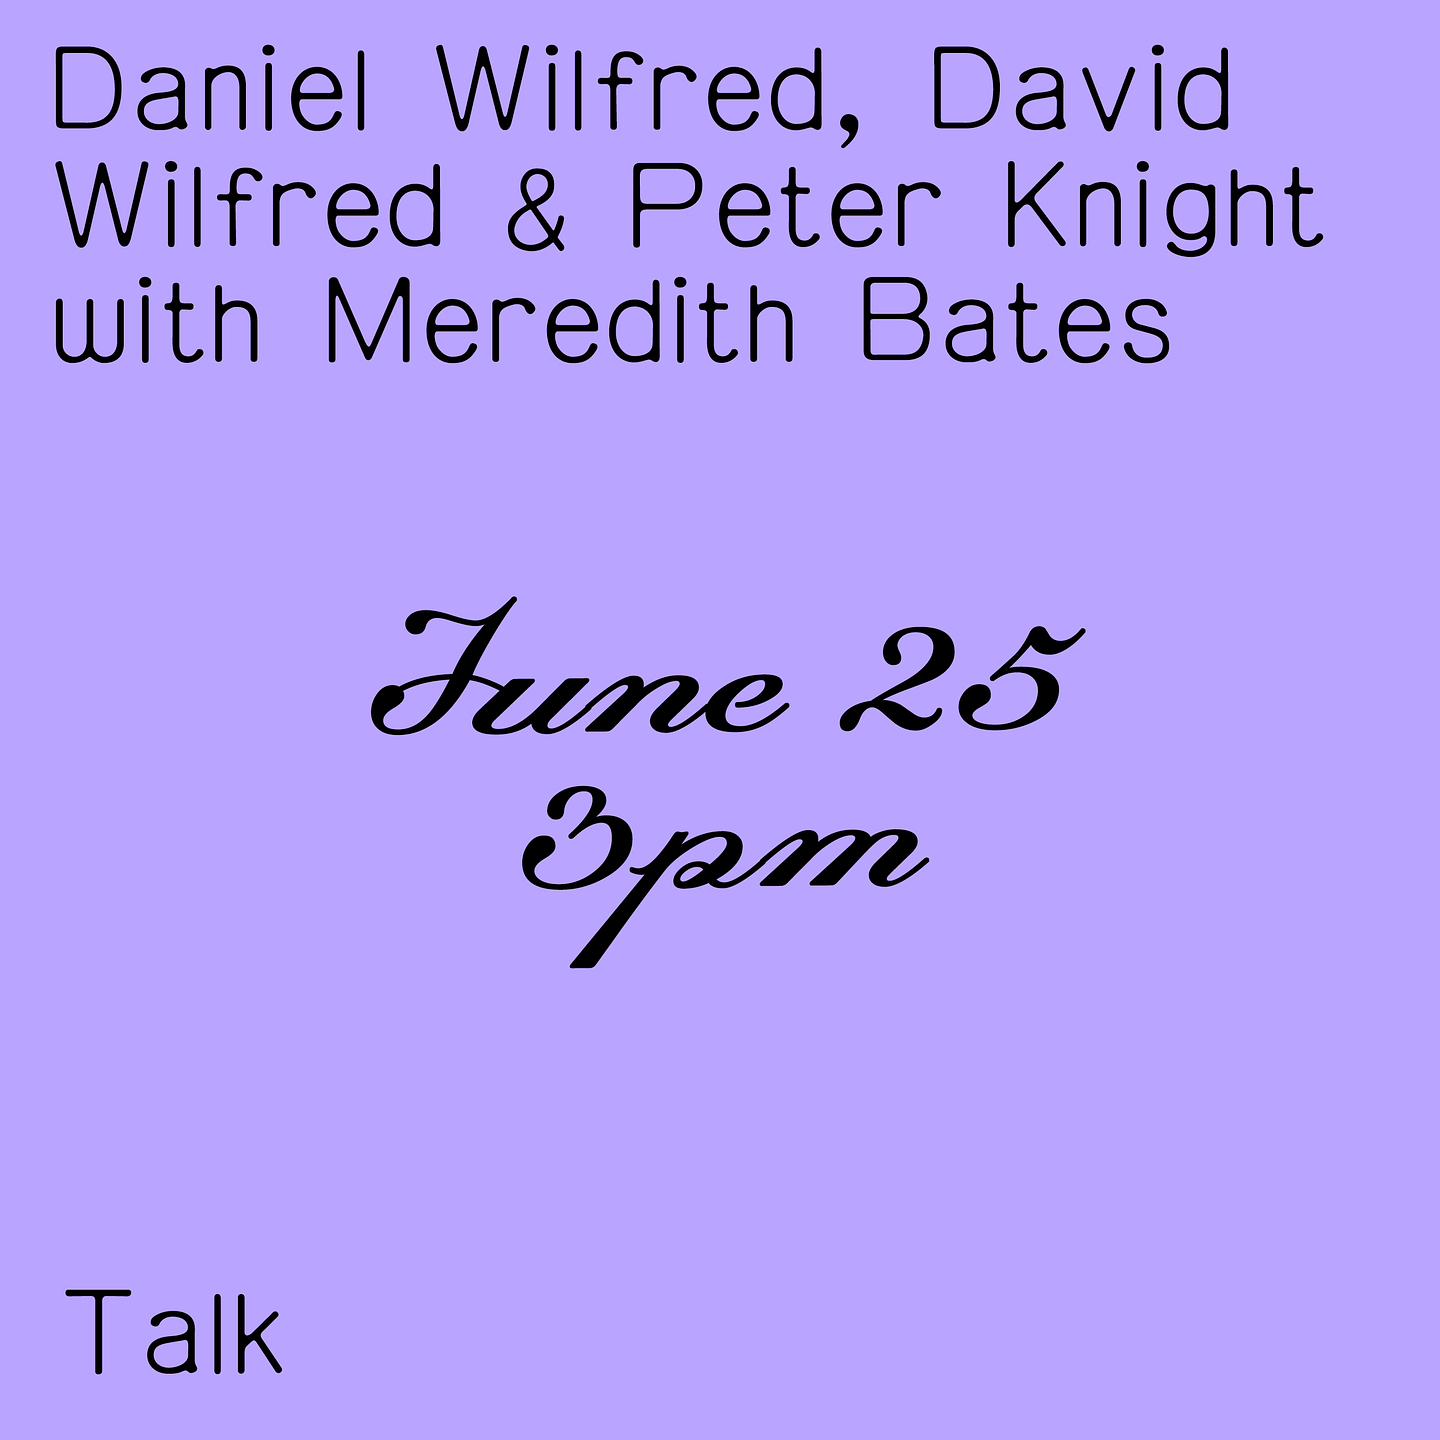 A graphic that reads "Peter Knight, Daniel Wilfred & David Wilfred with Meredith Bates. June 25 3pm. Talk." in a black script font on a lilac background.